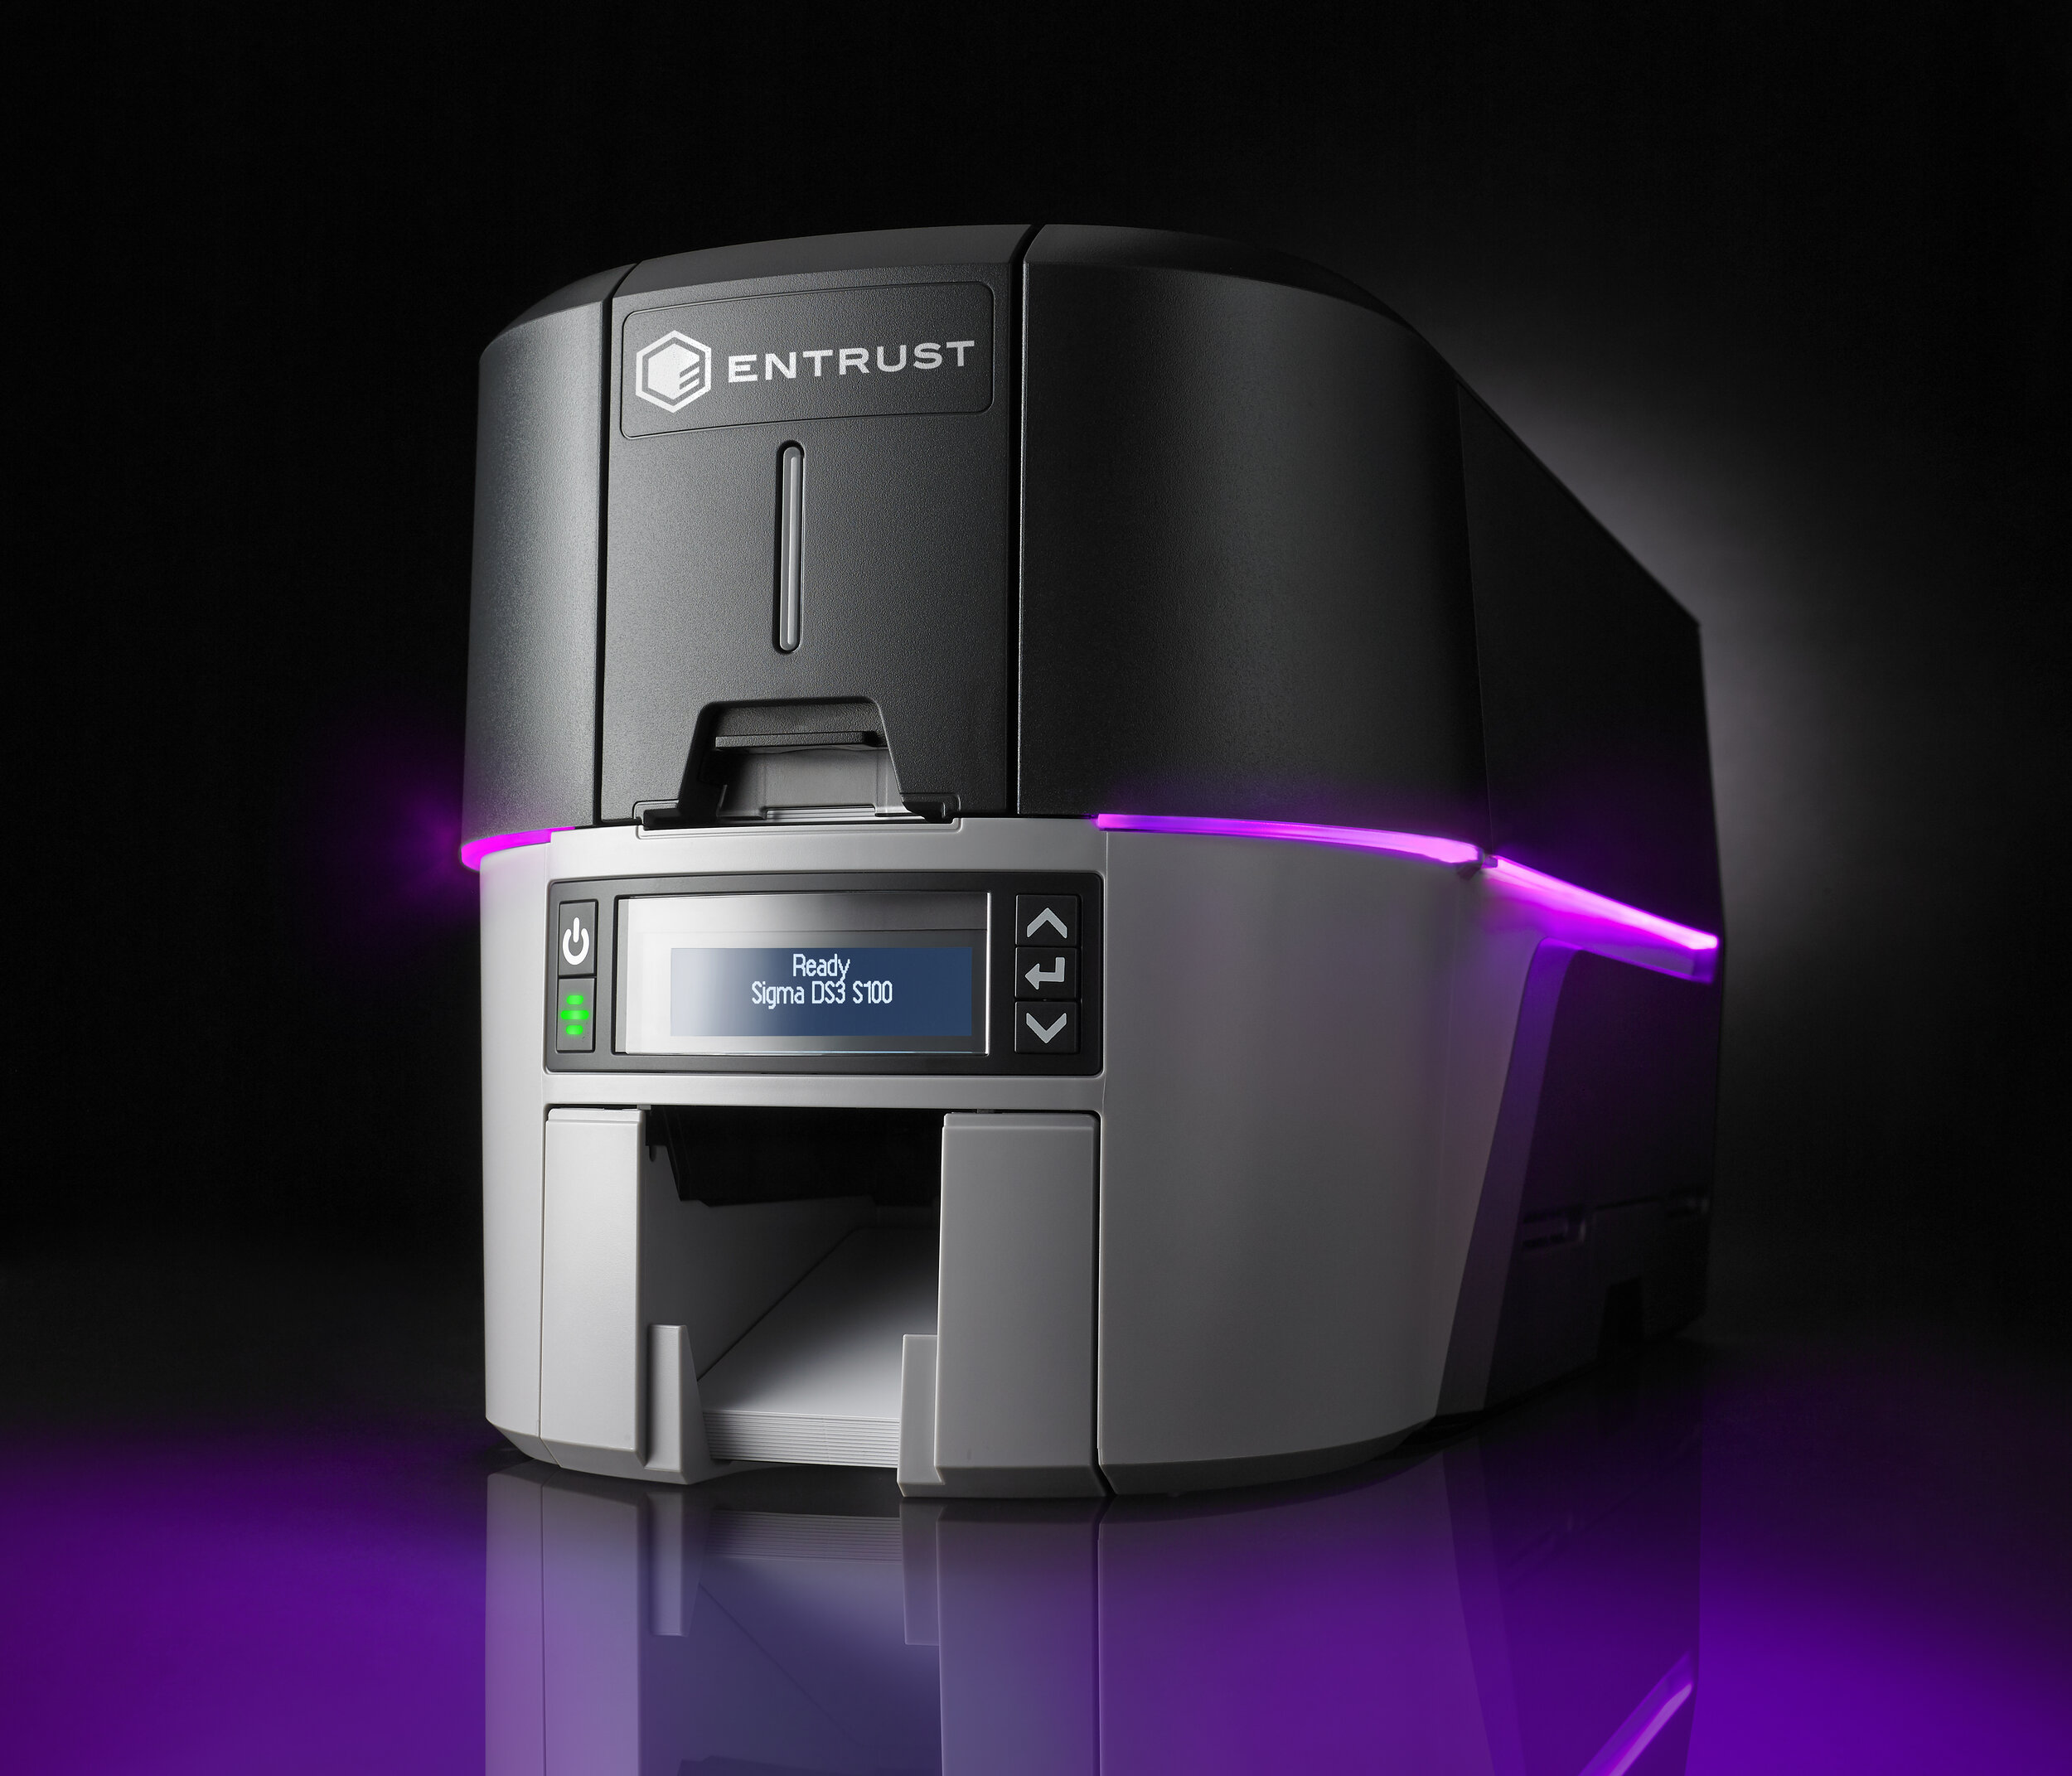 Sigma Printer Product Launch - Photography